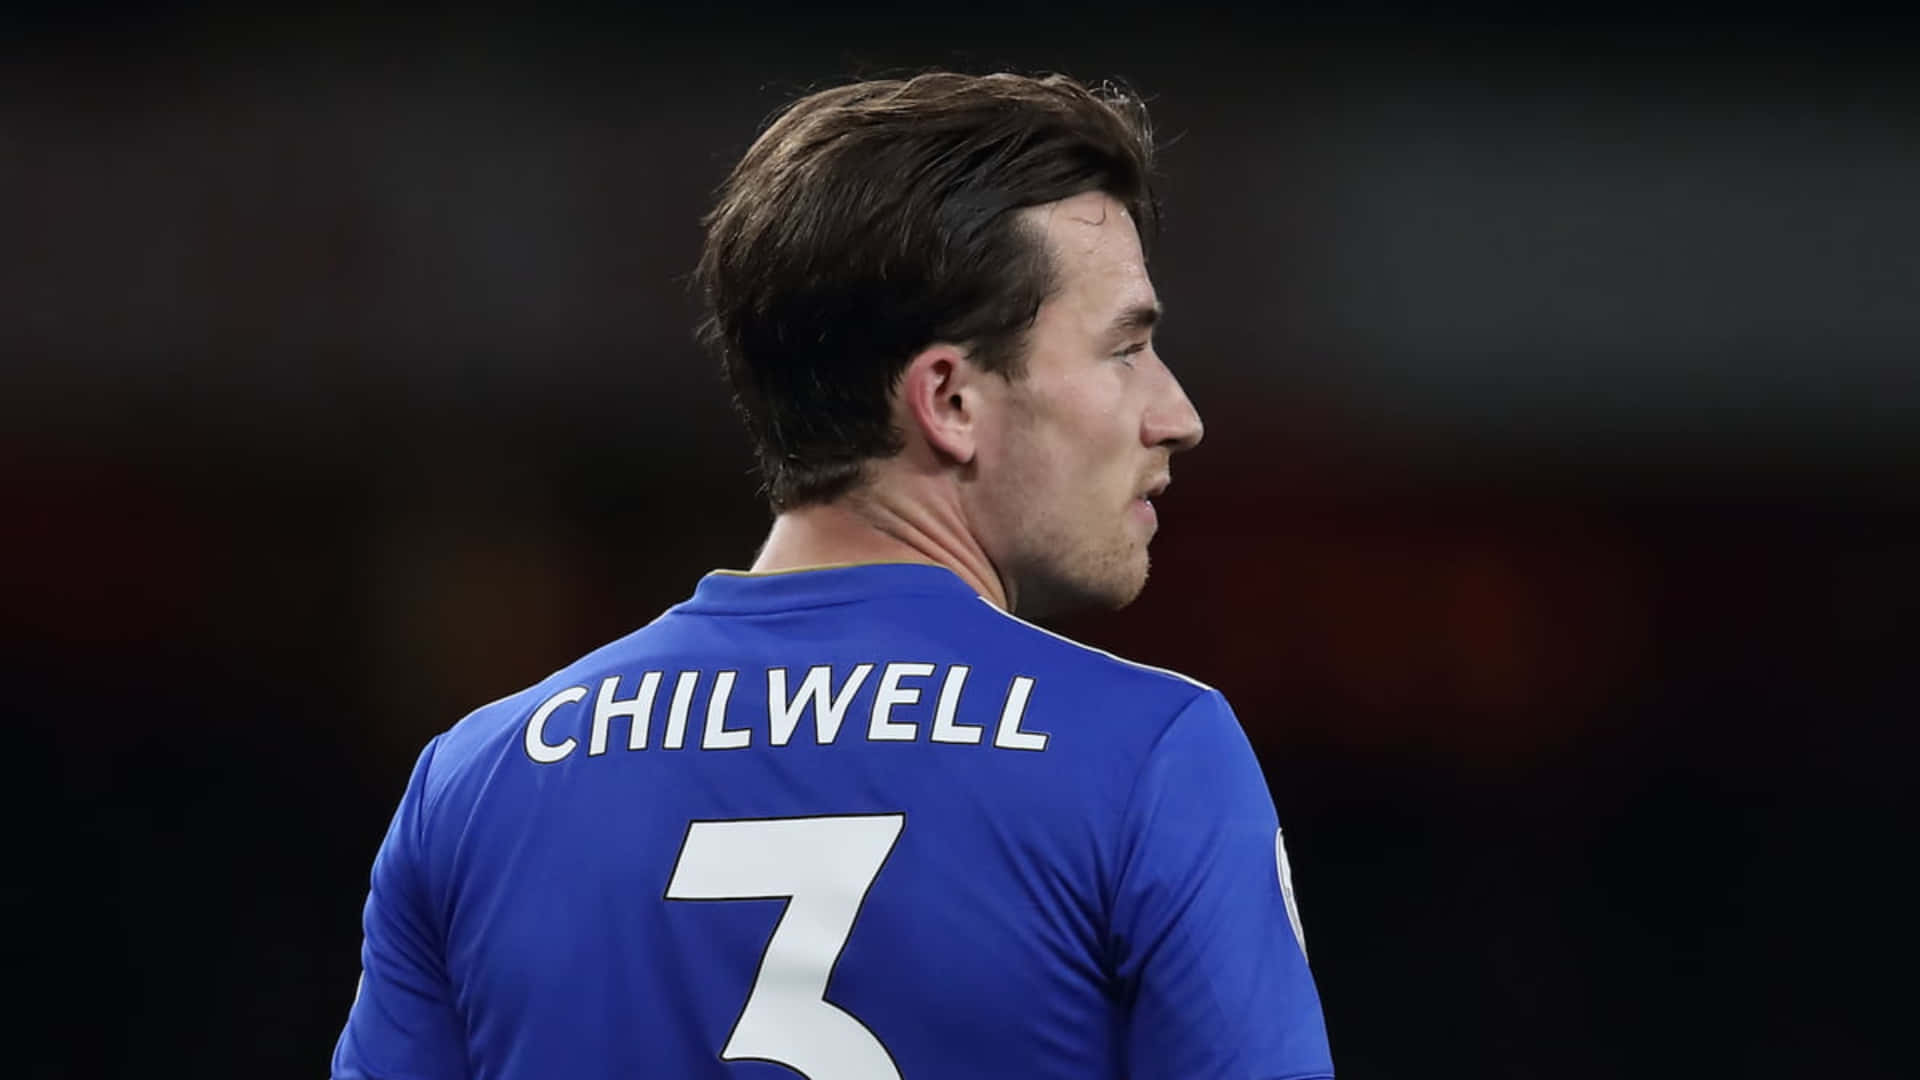 Ben Chilwell From The Back Wallpaper